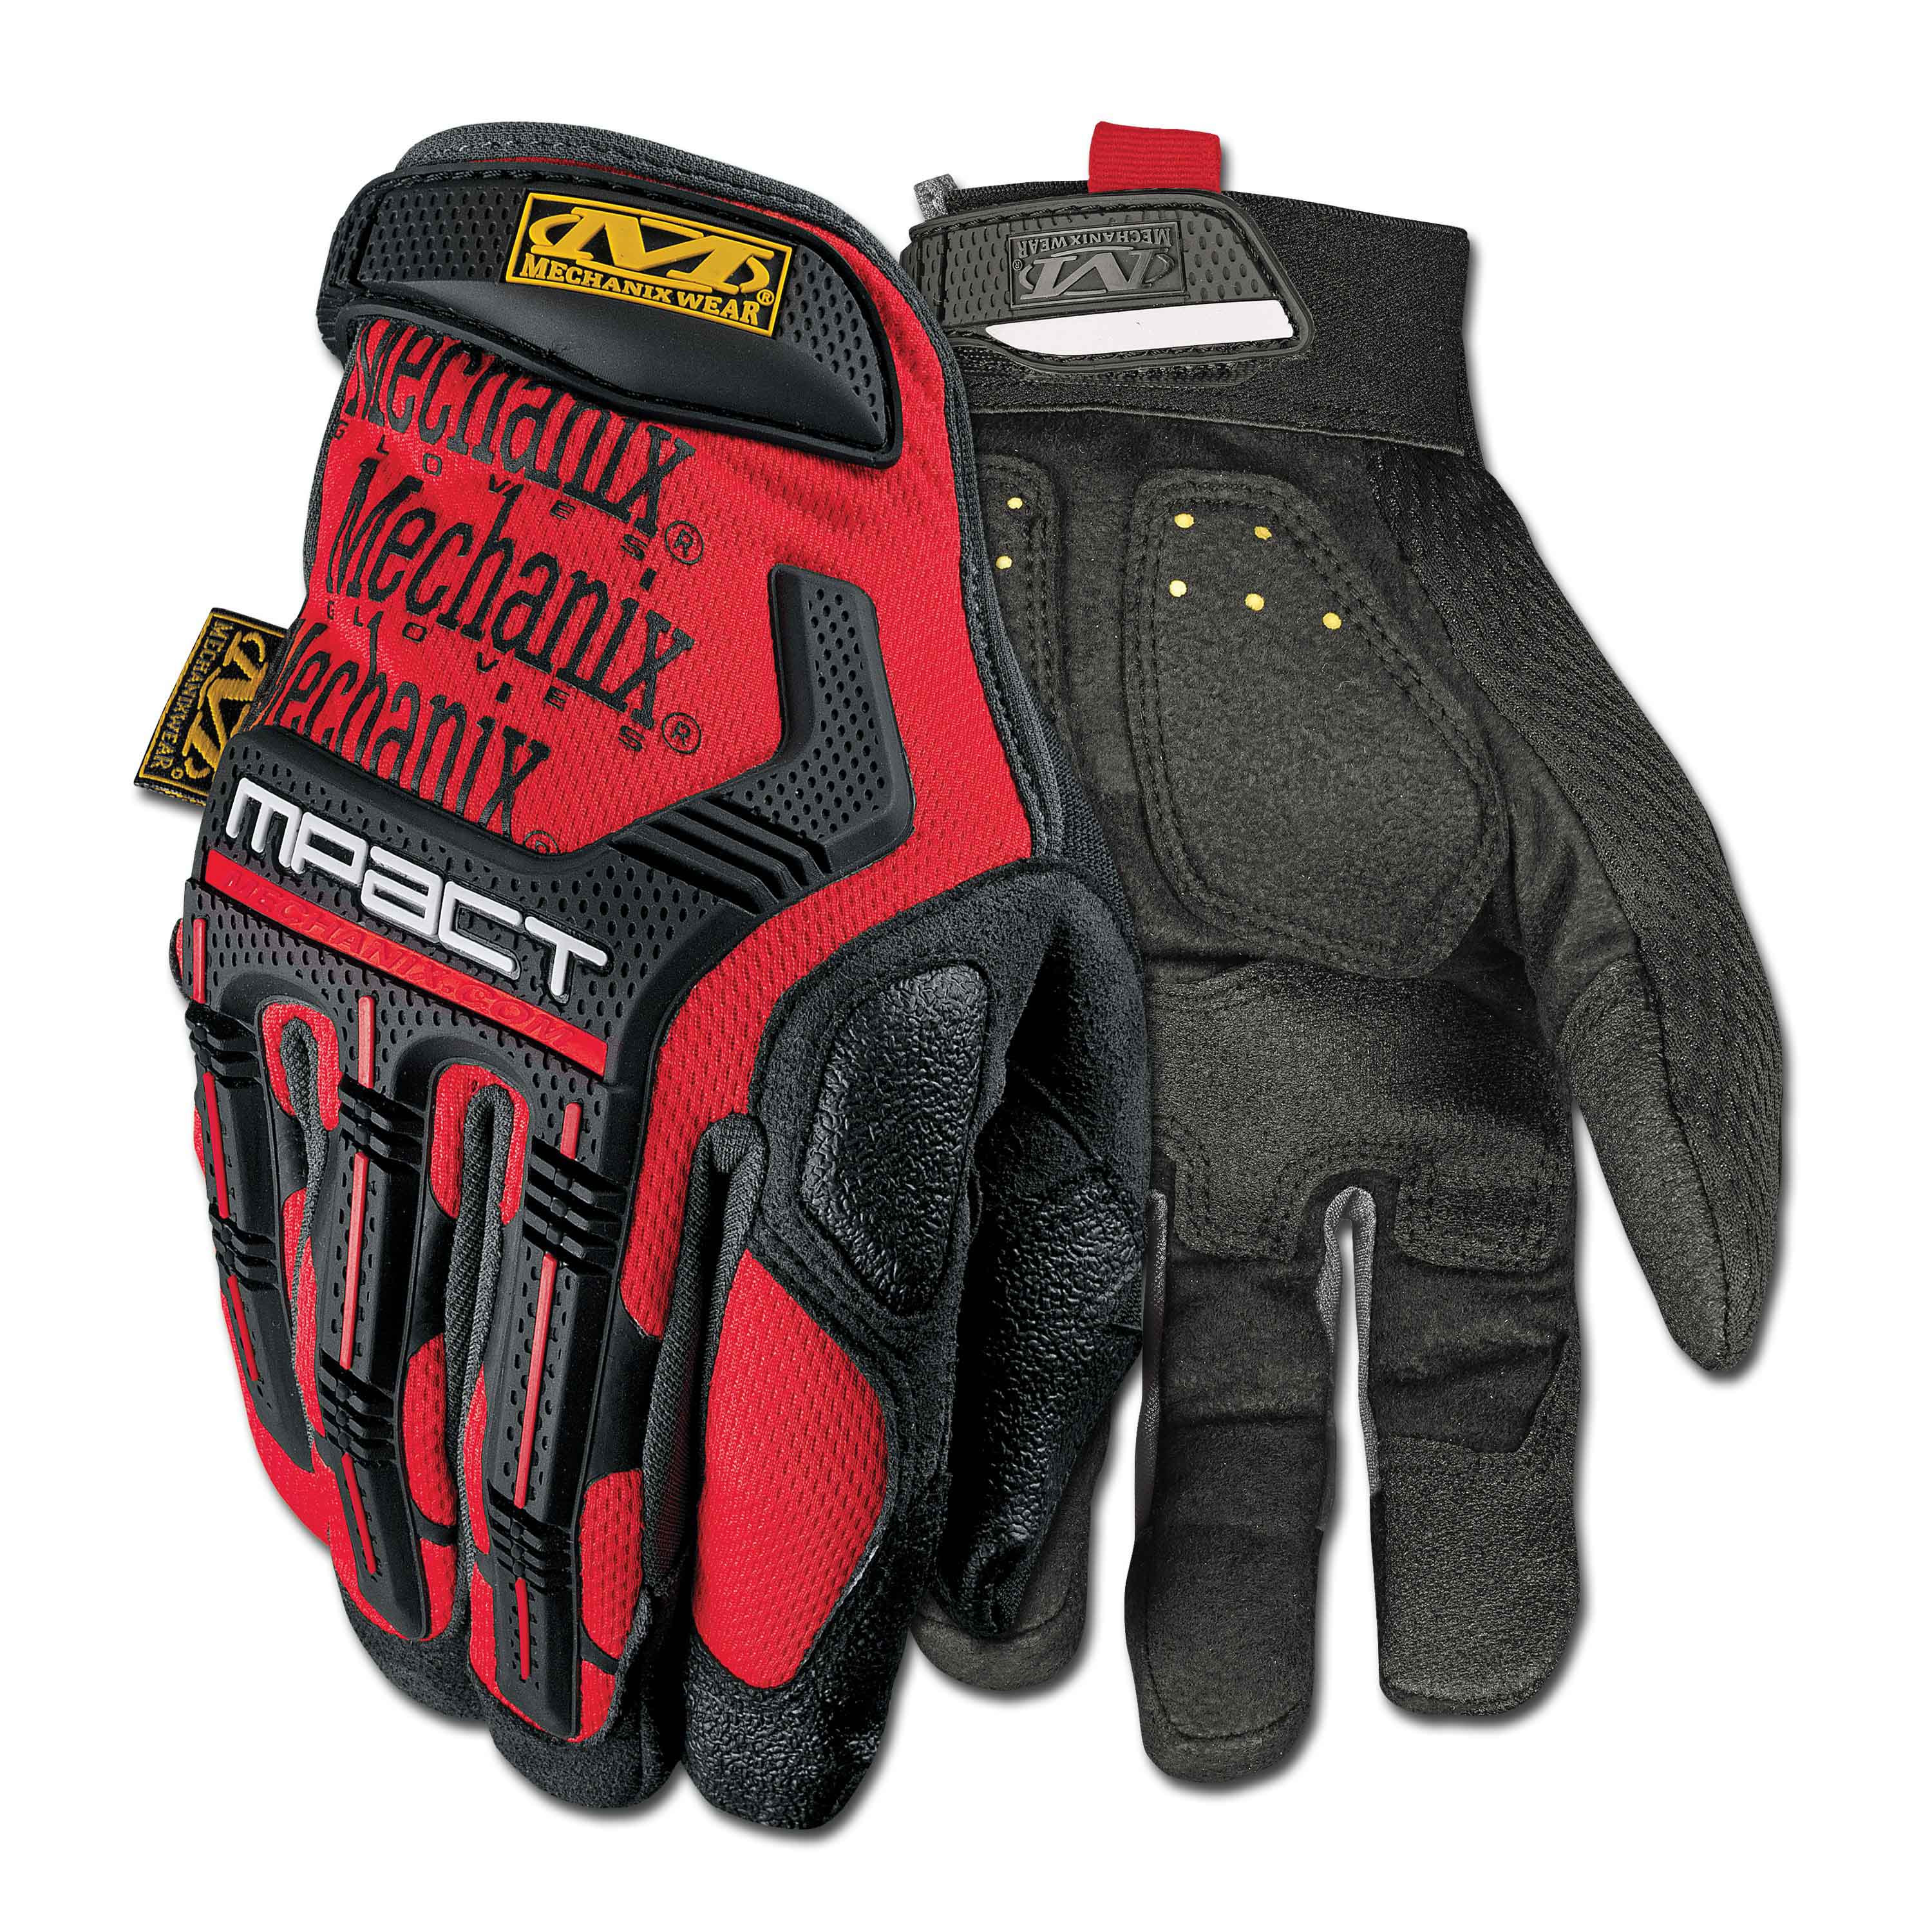 Mechanix Wear M-Pact Gloves Multipurpose Tactical Airsoft Work Mens Black/Red 